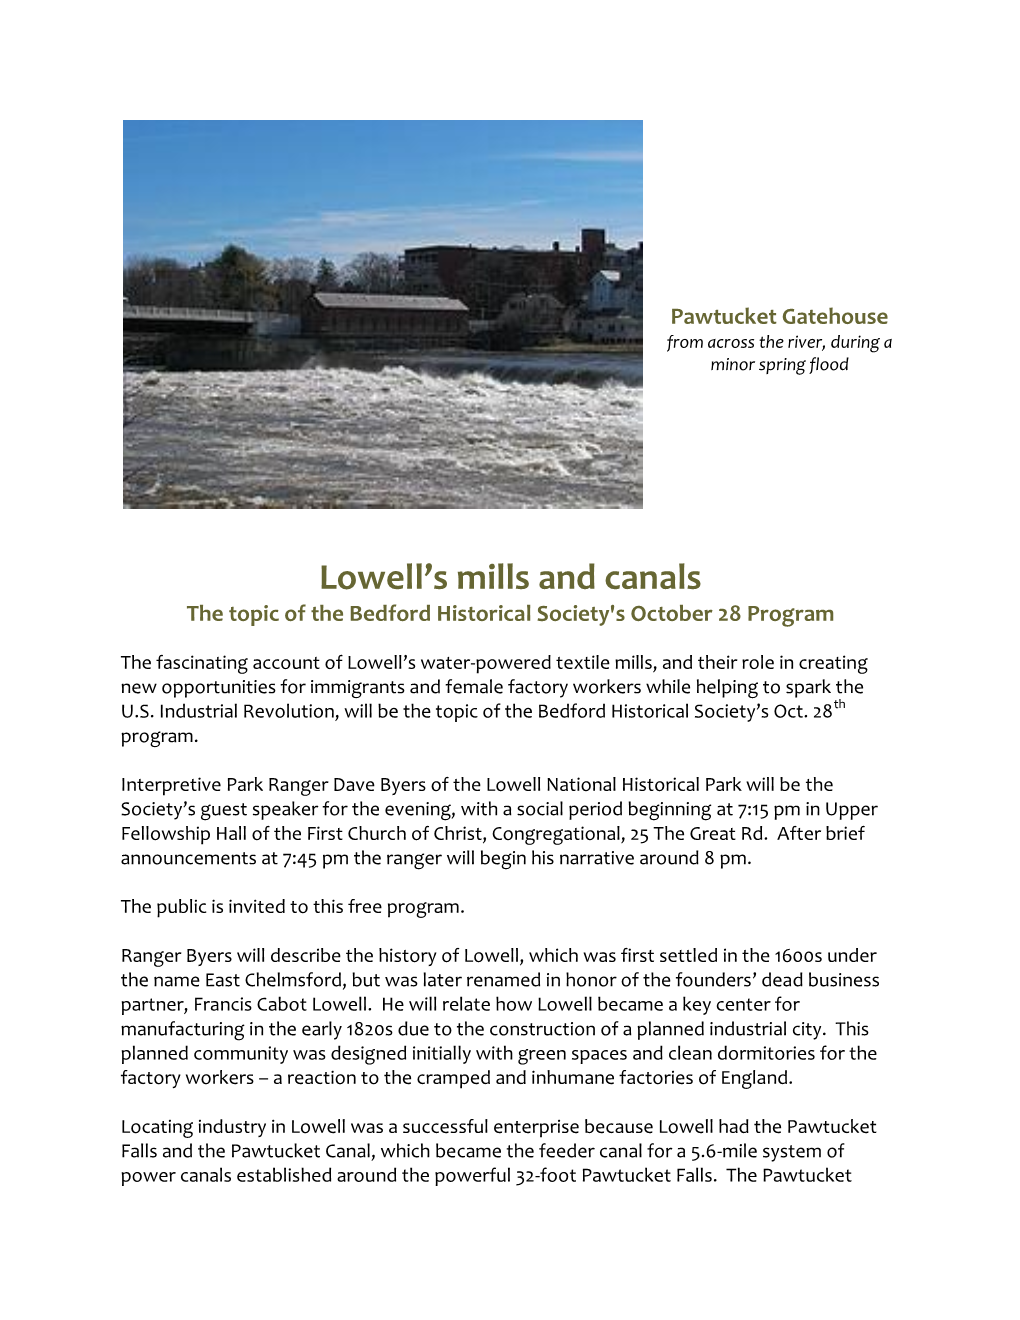 Lowell's Mills and Canals